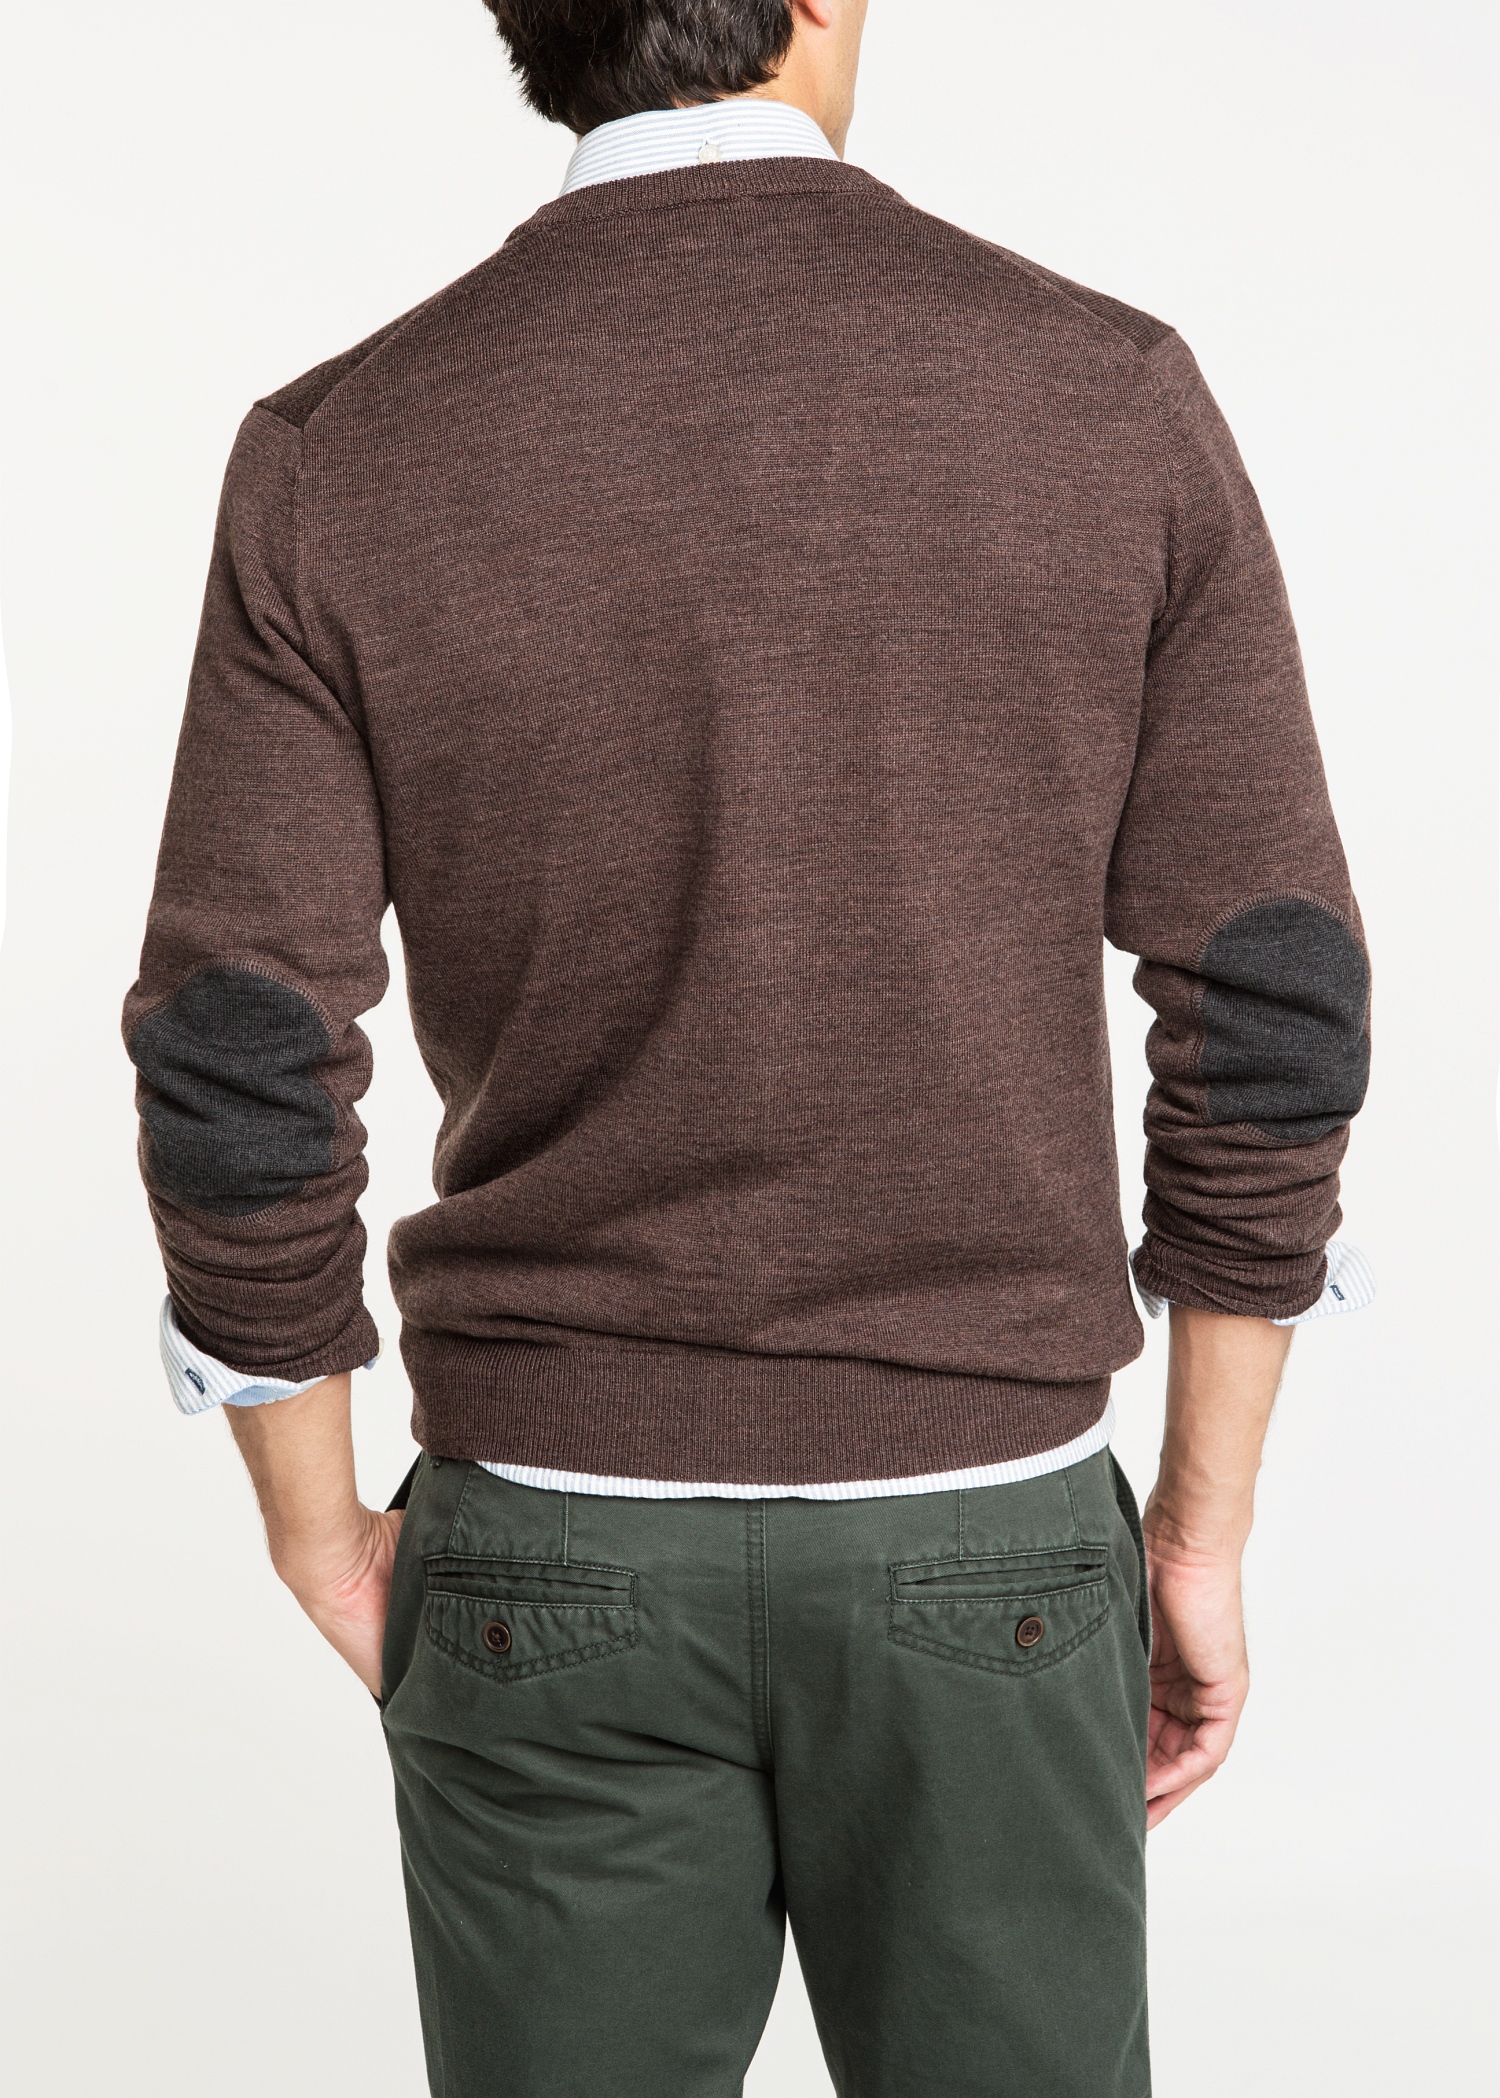 Lyst - Mango Elbow Patch Wool Cardigan in Brown for Men